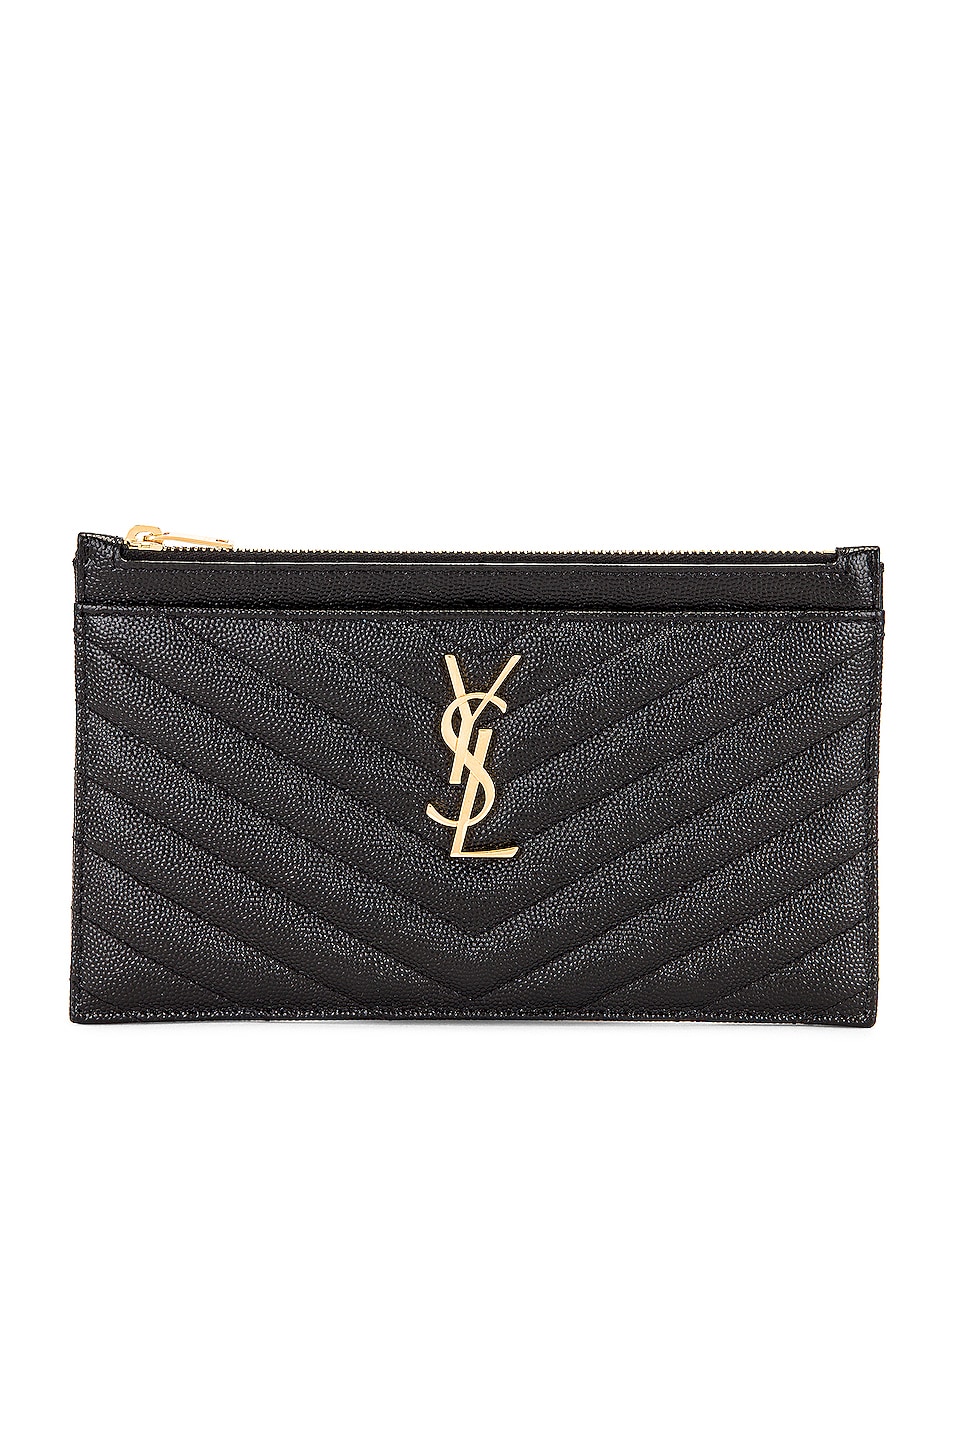 Monogramme Pouch in Black